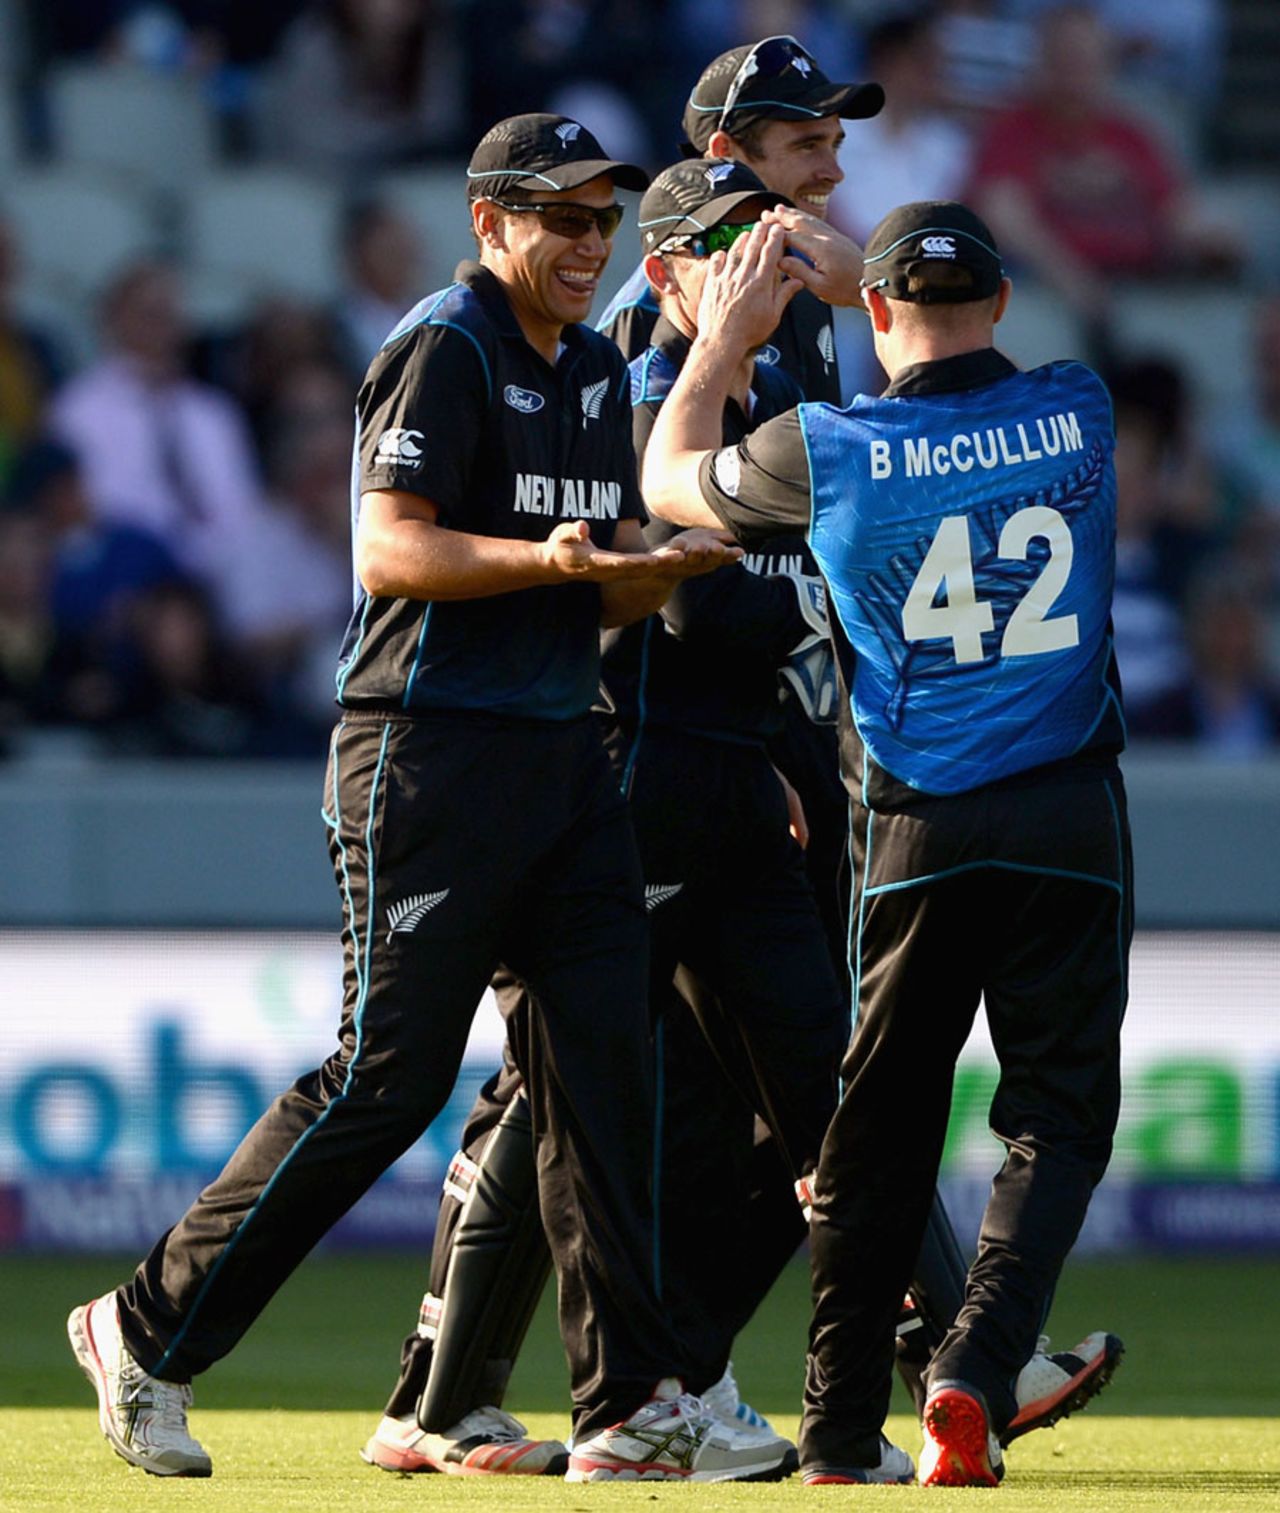 Ross Taylor took a well-judged catch to remove Eoin Morgan, England v New Zealand, only T20, Old Trafford, June 23, 2015